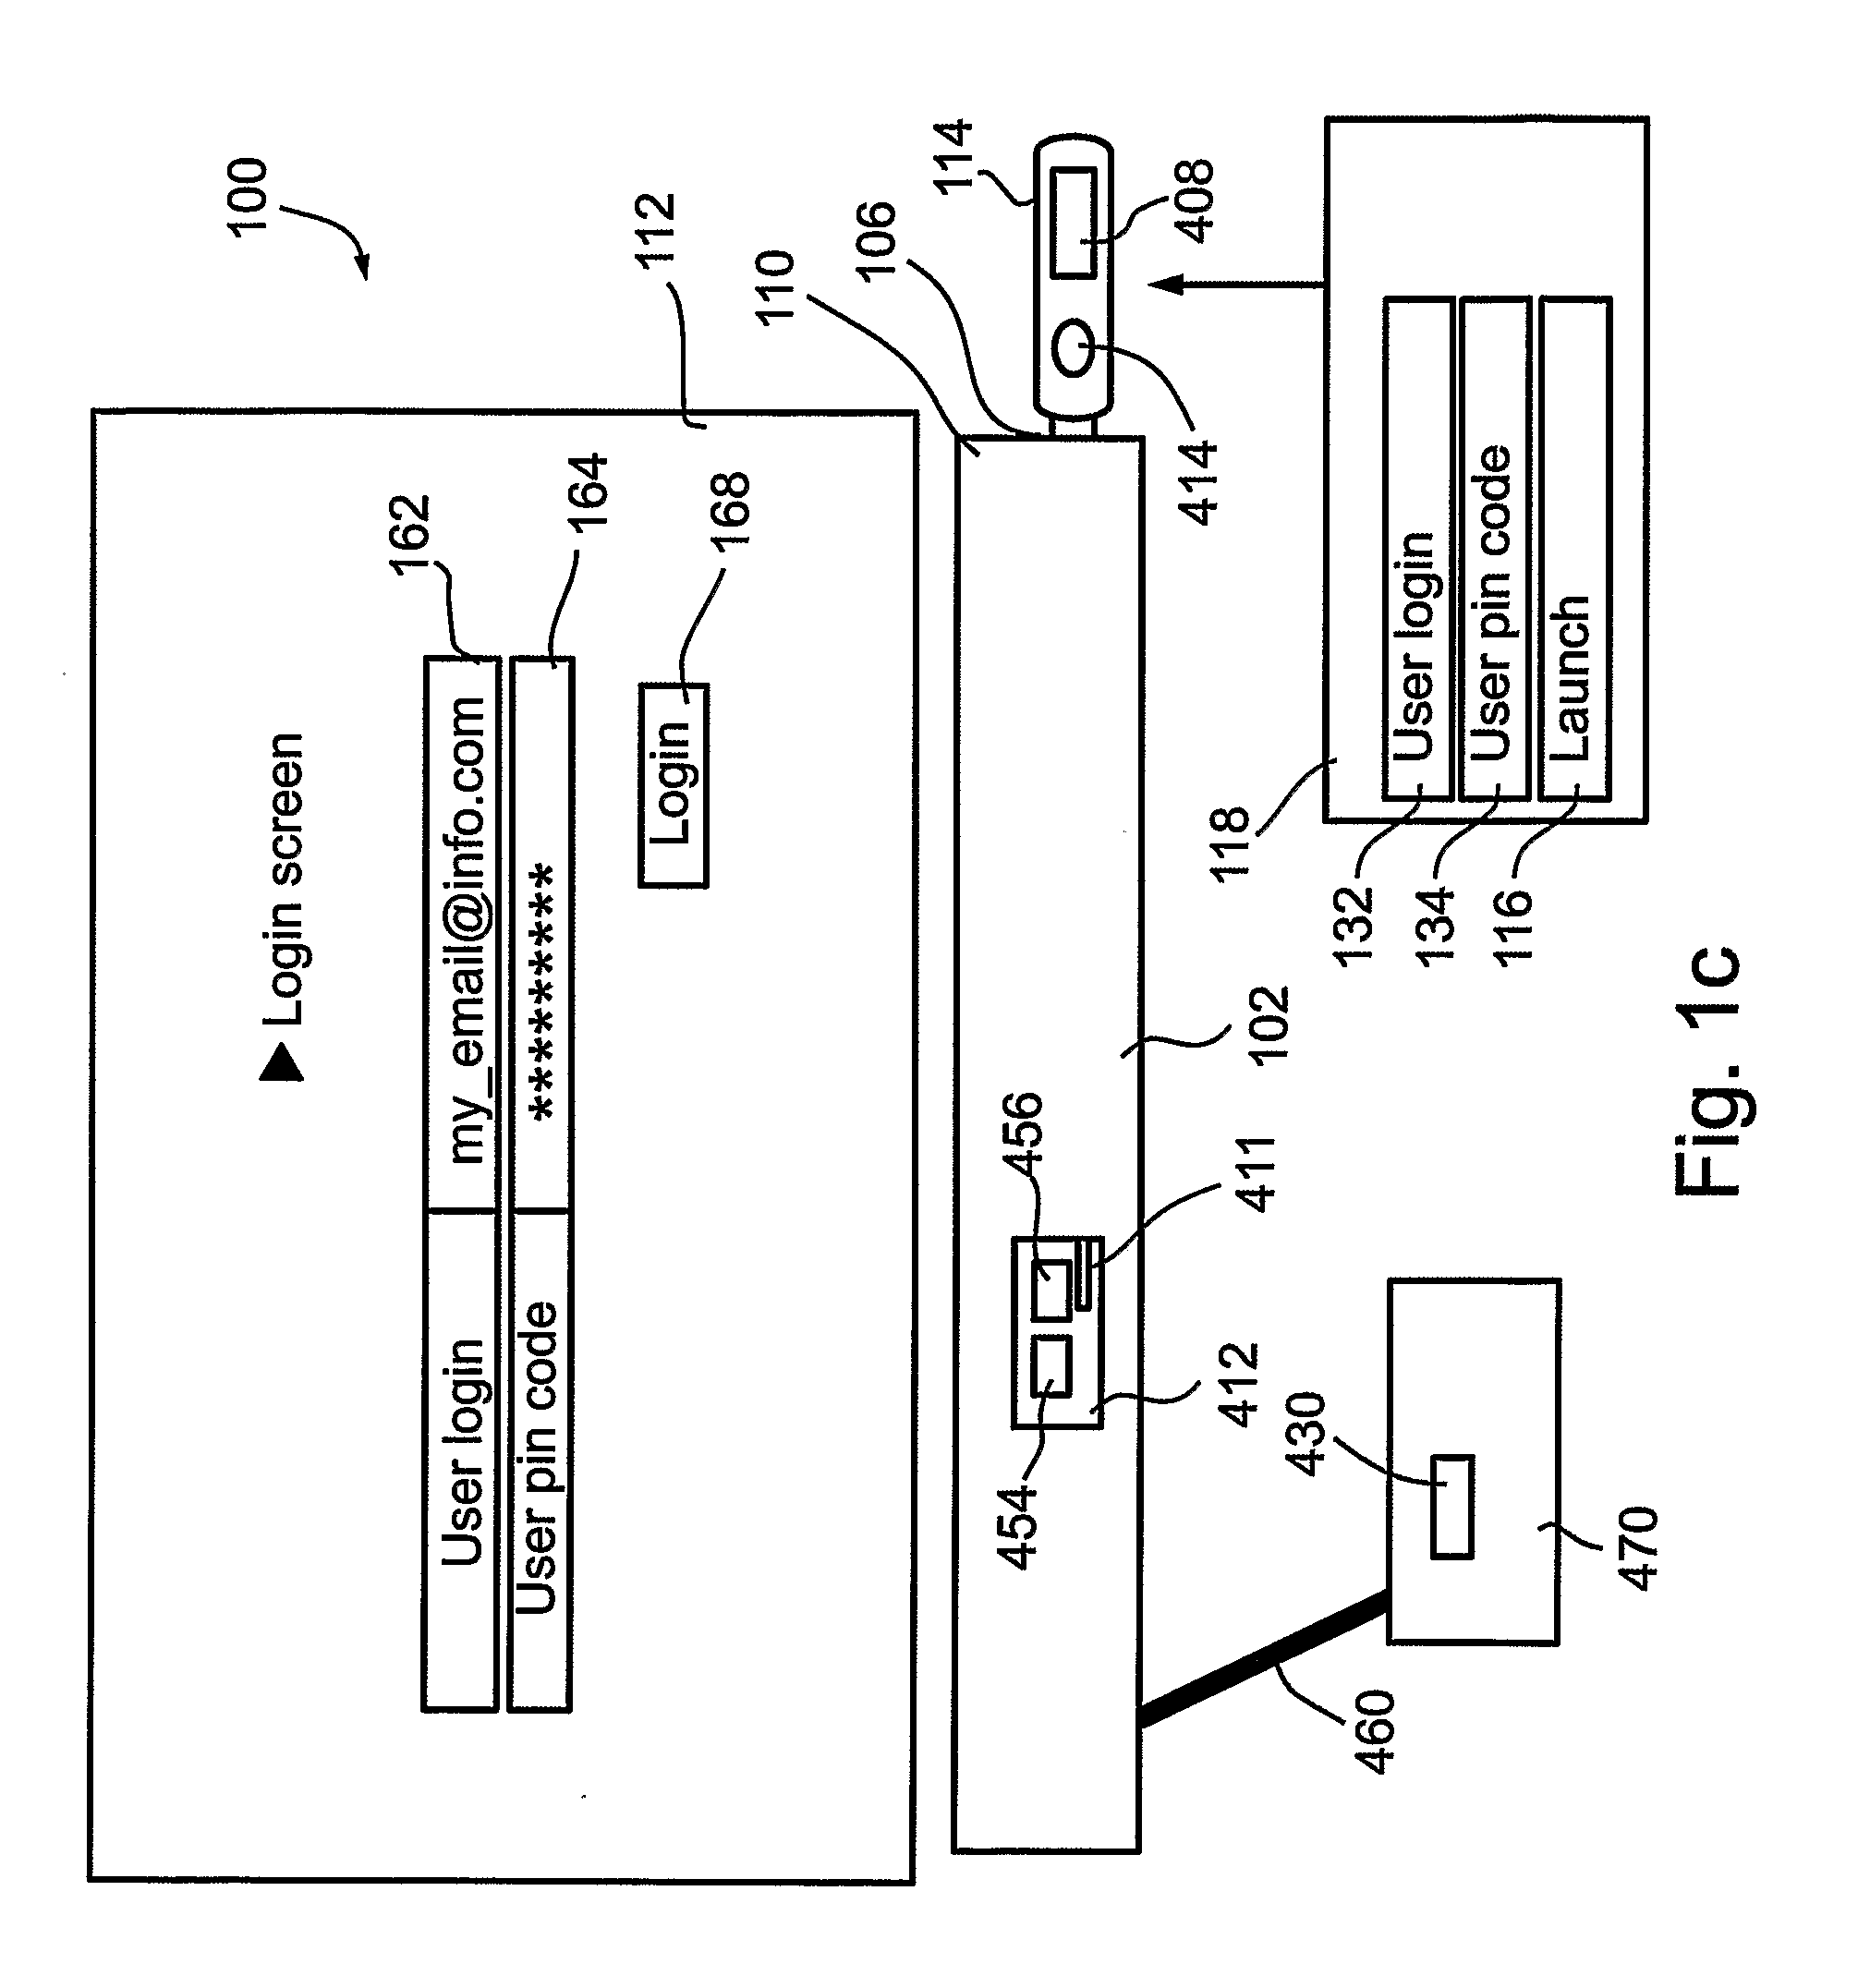 Computer Session Management Device and System